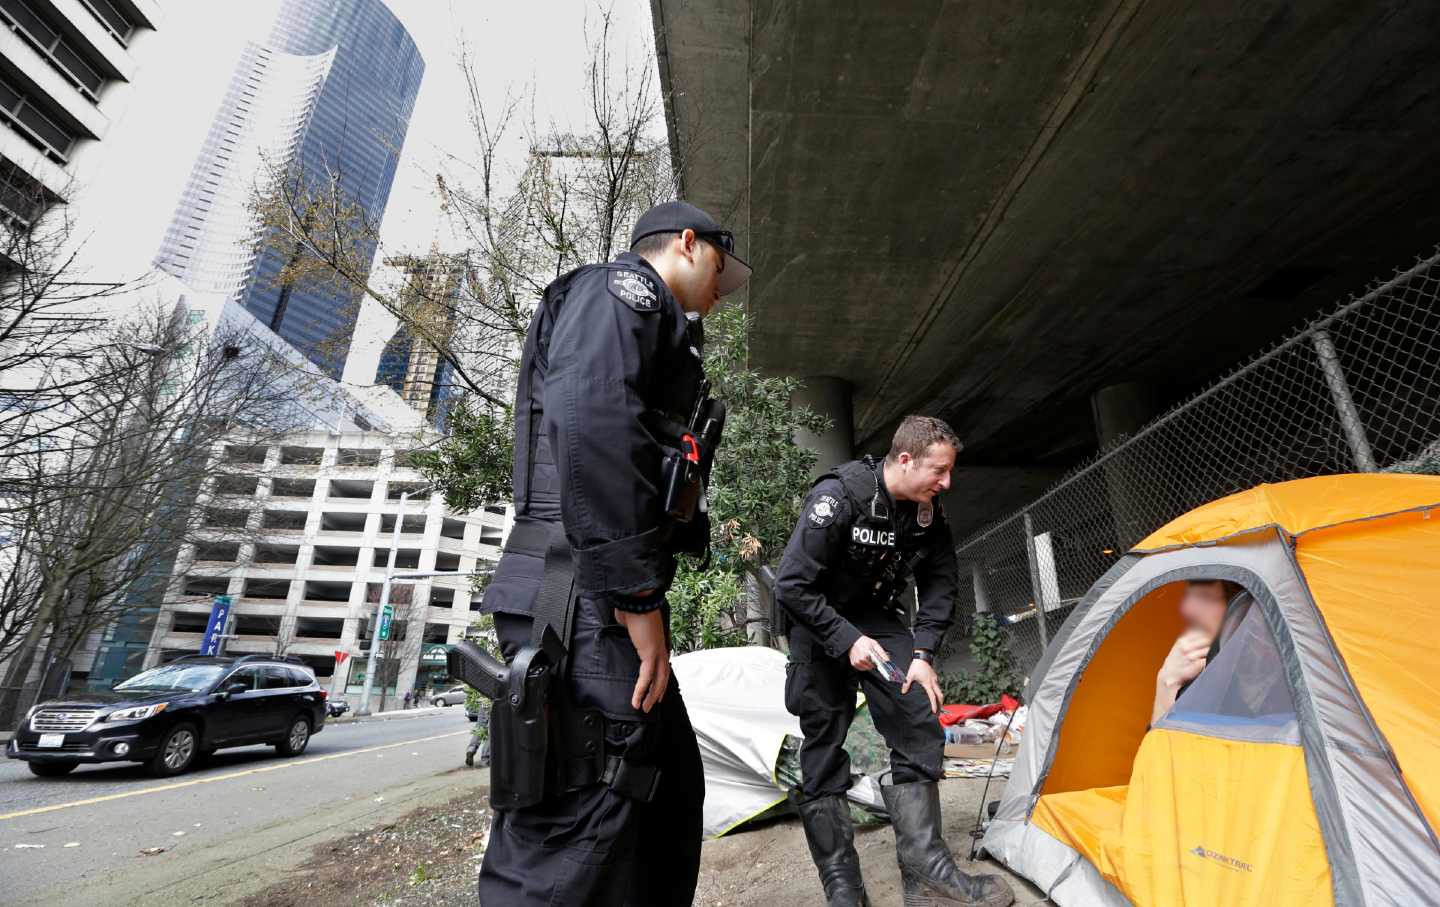 A cop leans over to talk to a person inside a yellow tent under a highway overpass.